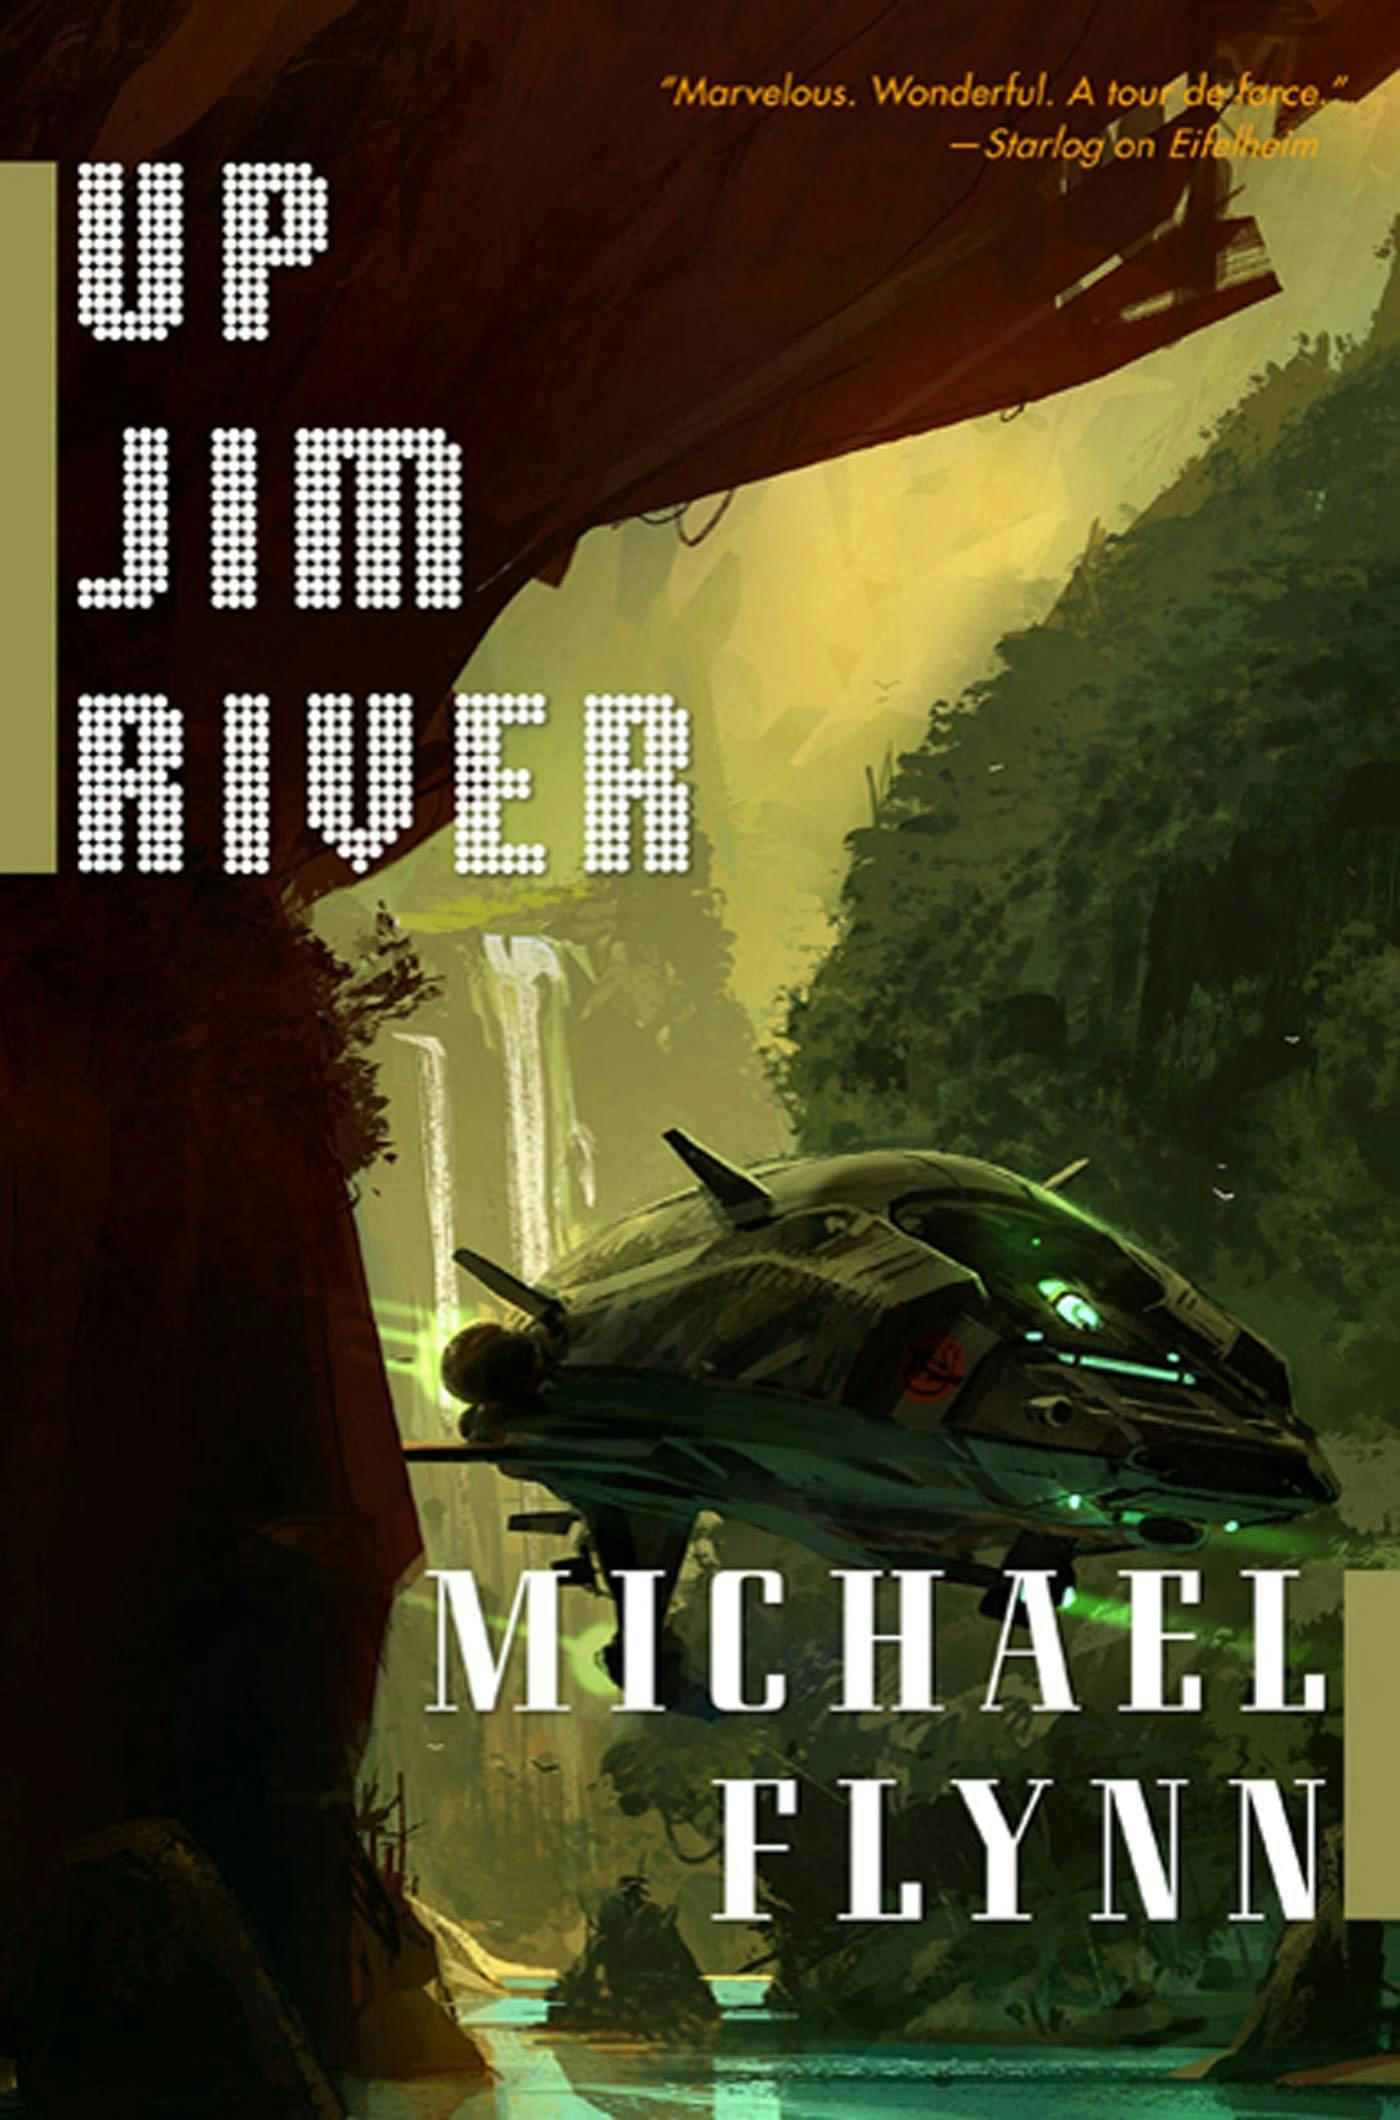 Cover for the book titled as: Up Jim River